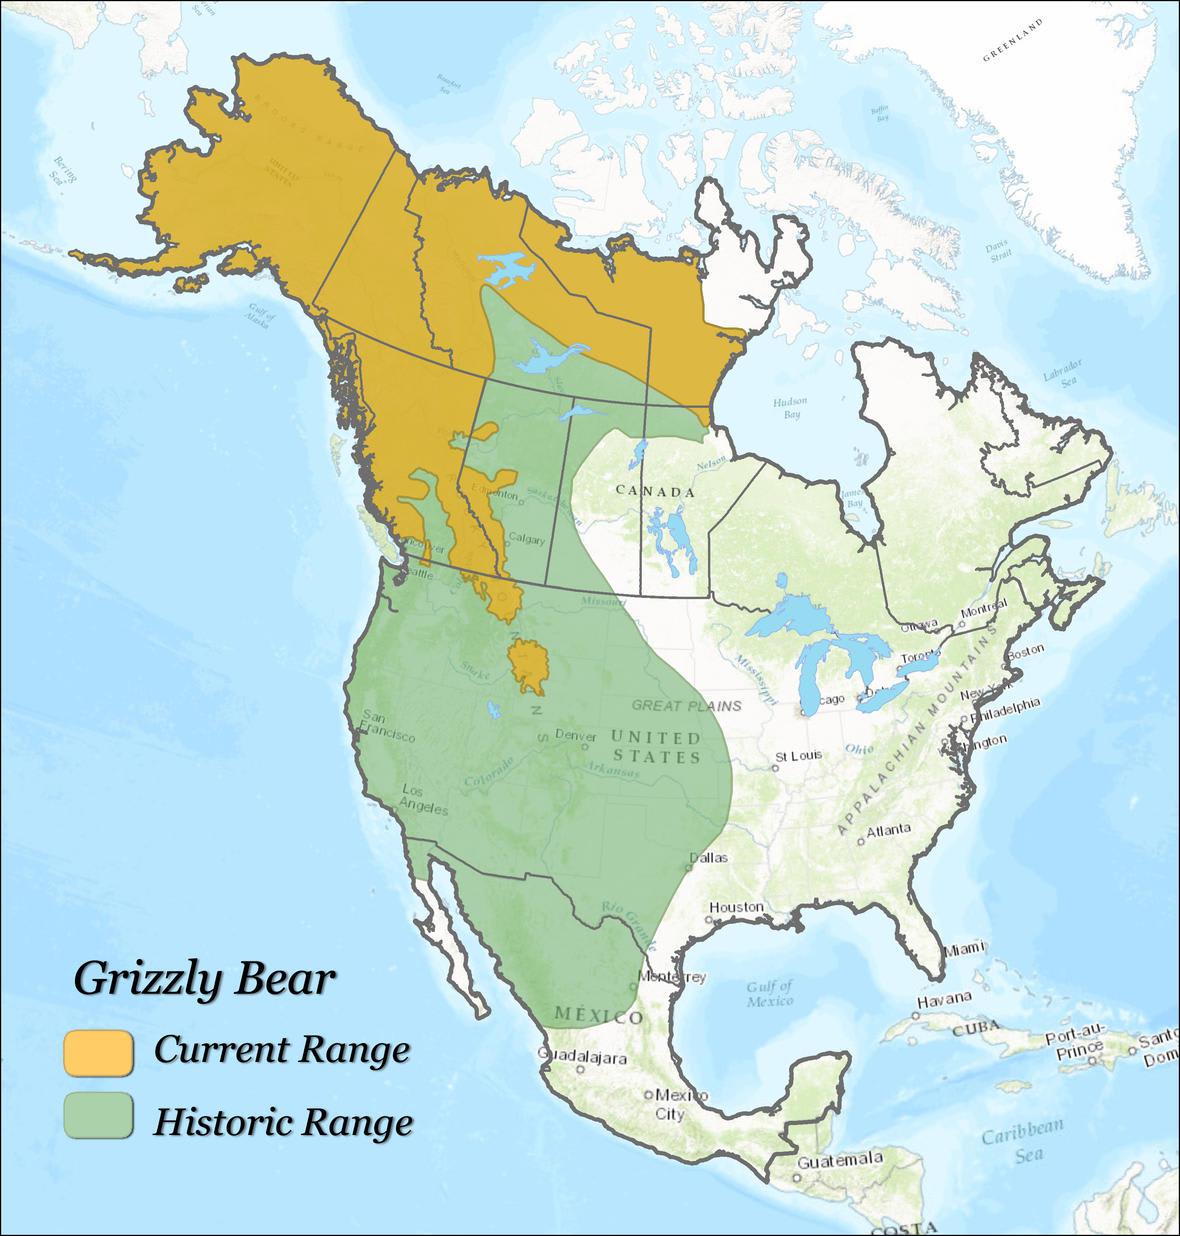 Saw something in this sub the other day about the historic grizzly bear range vs. their current range. Thought this map was interesting and worth sharing